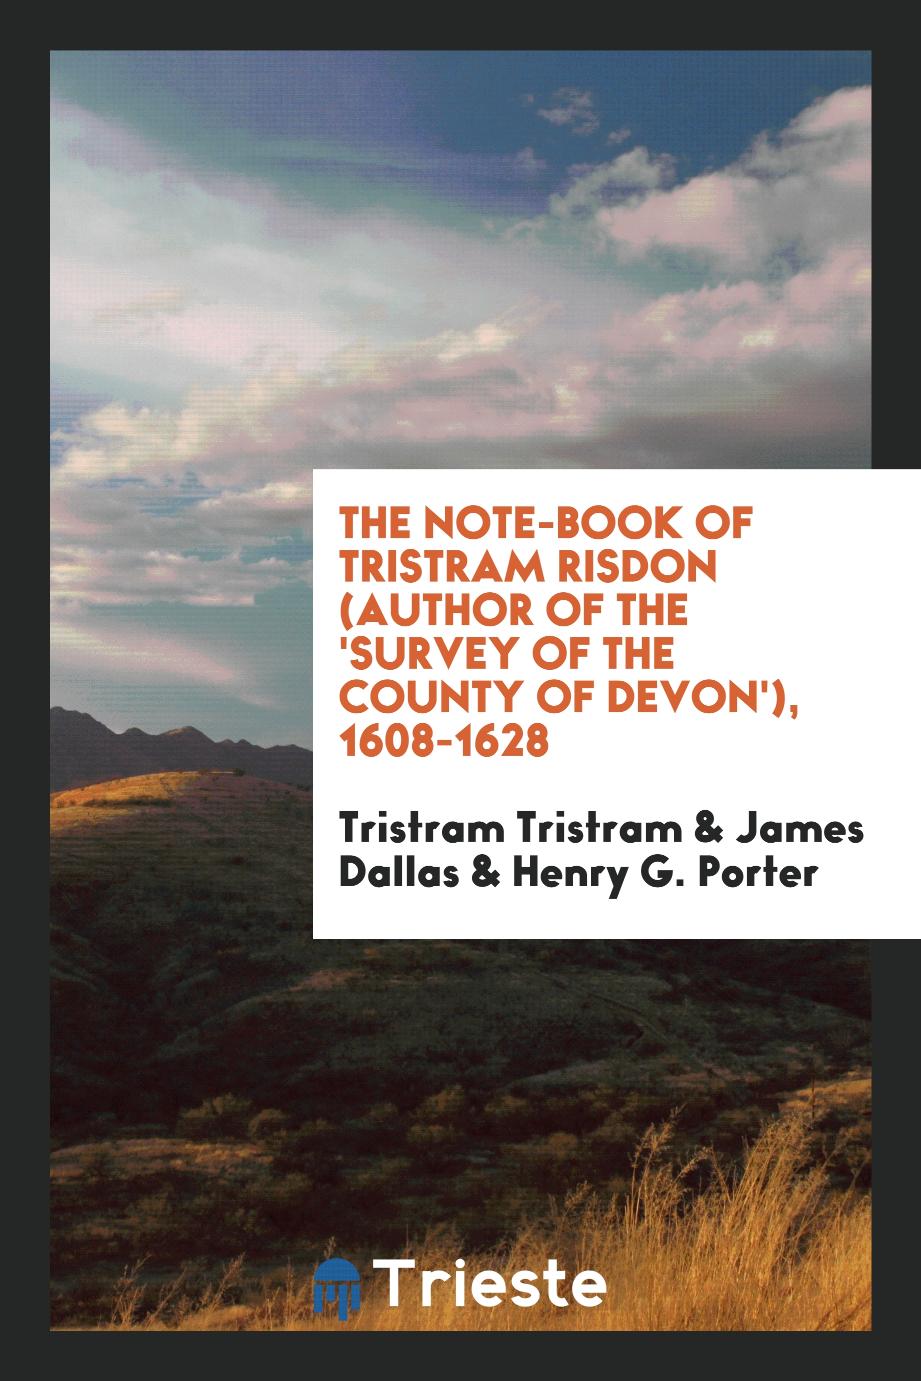 The Note-Book of Tristram Risdon (Author of the 'Survey of the County of Devon'), 1608-1628